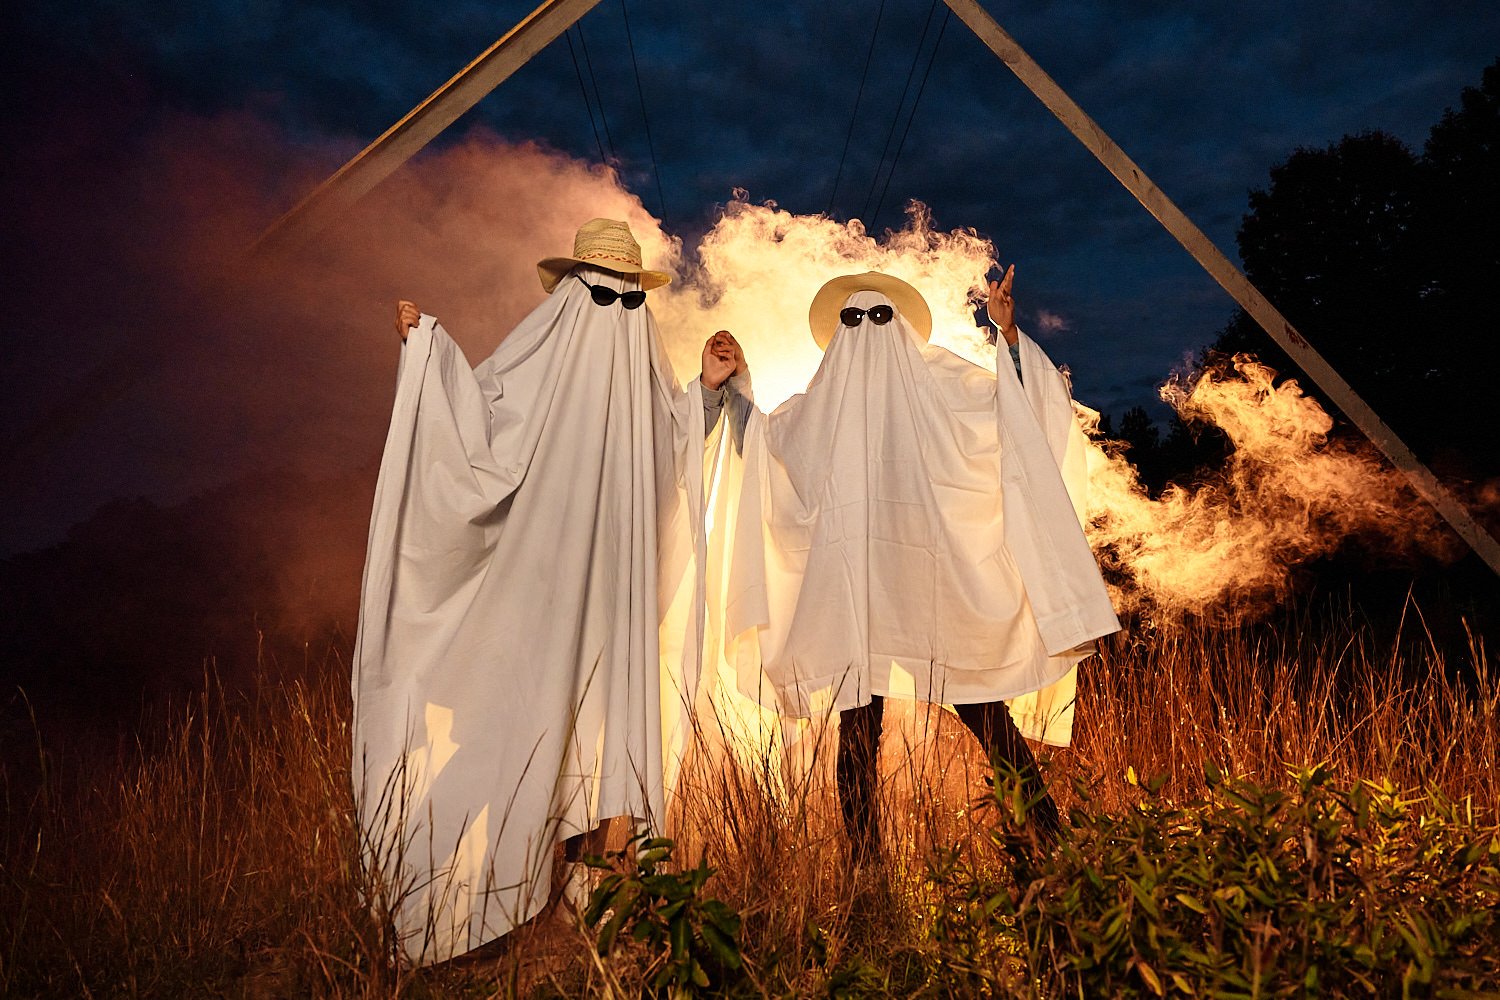  Alena Gurevich and her friend Aekam Kaur are dressed as ghosts for Halloween in October 2020. They wear sunglasses and there’s orange and purple smoke around them in the field. 